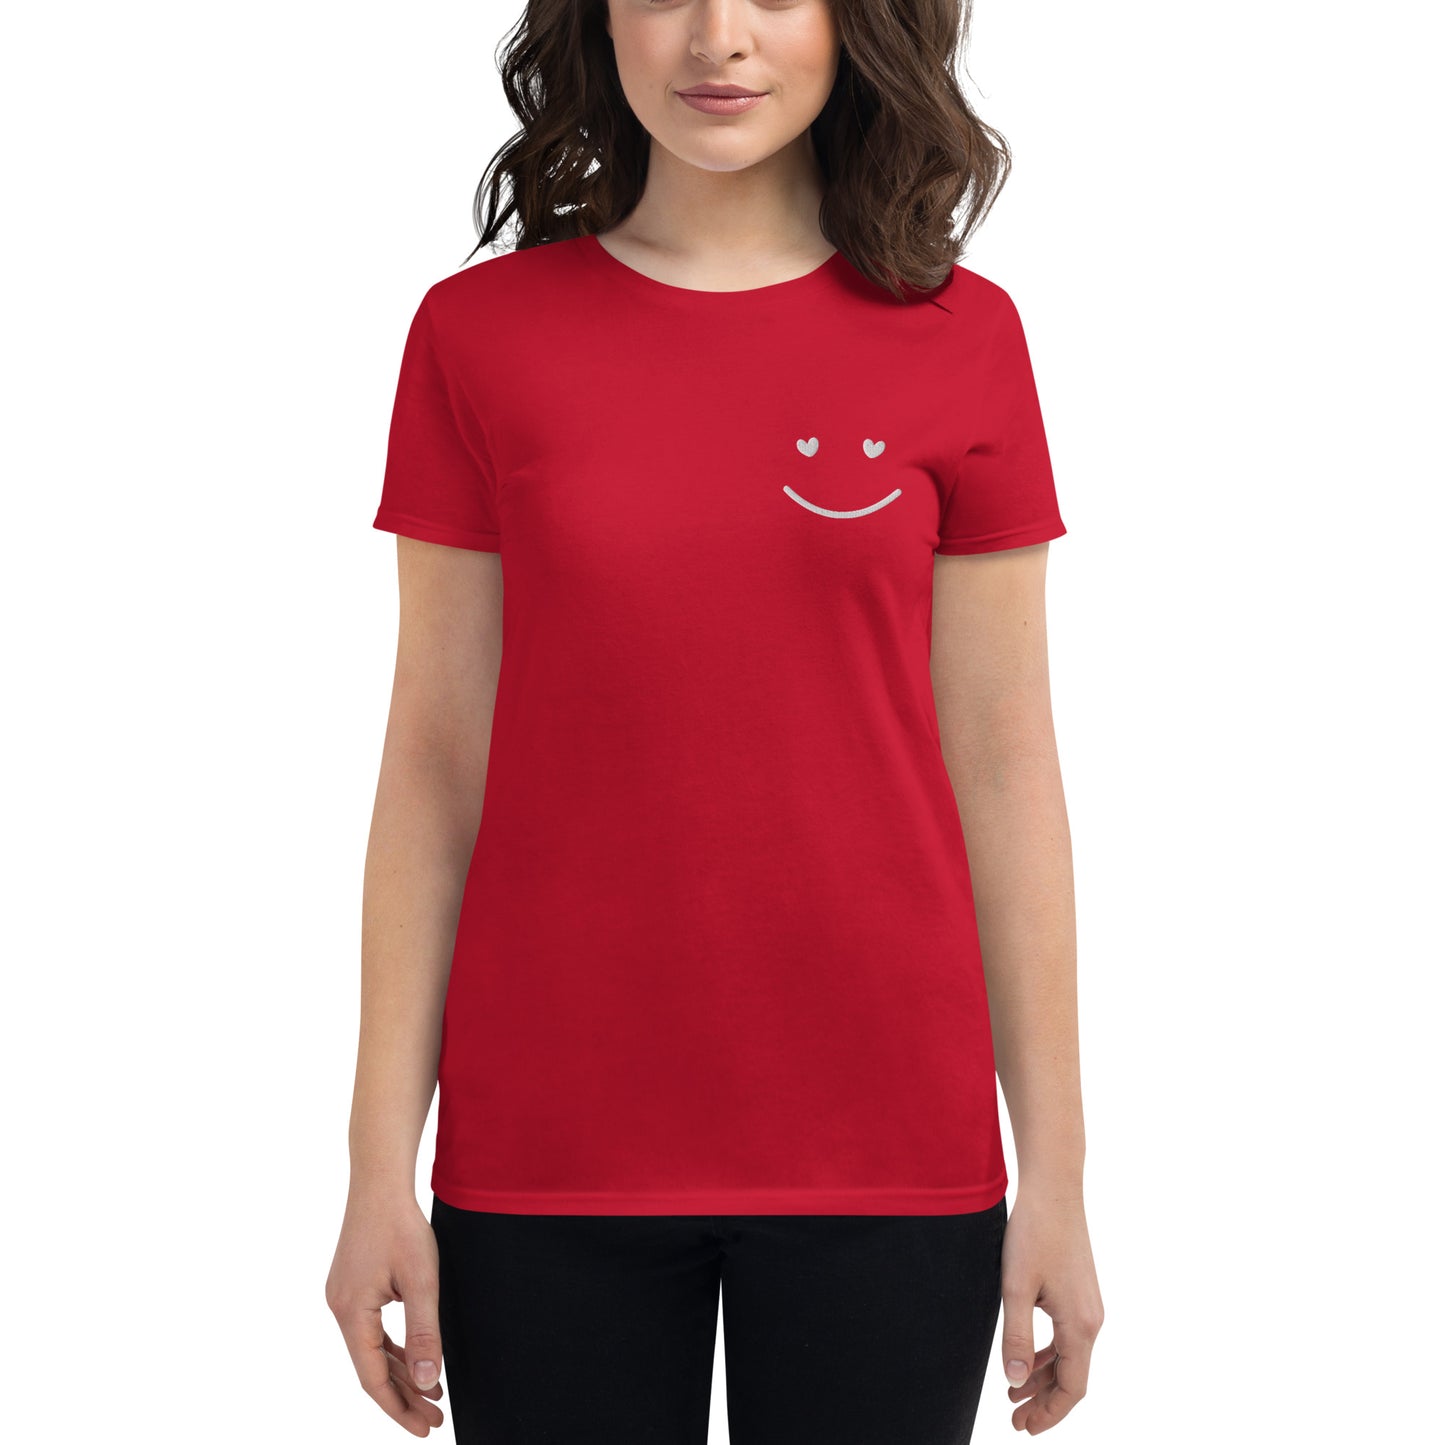 Smiling Heart Eyes Embroidered Women's T-Shirt